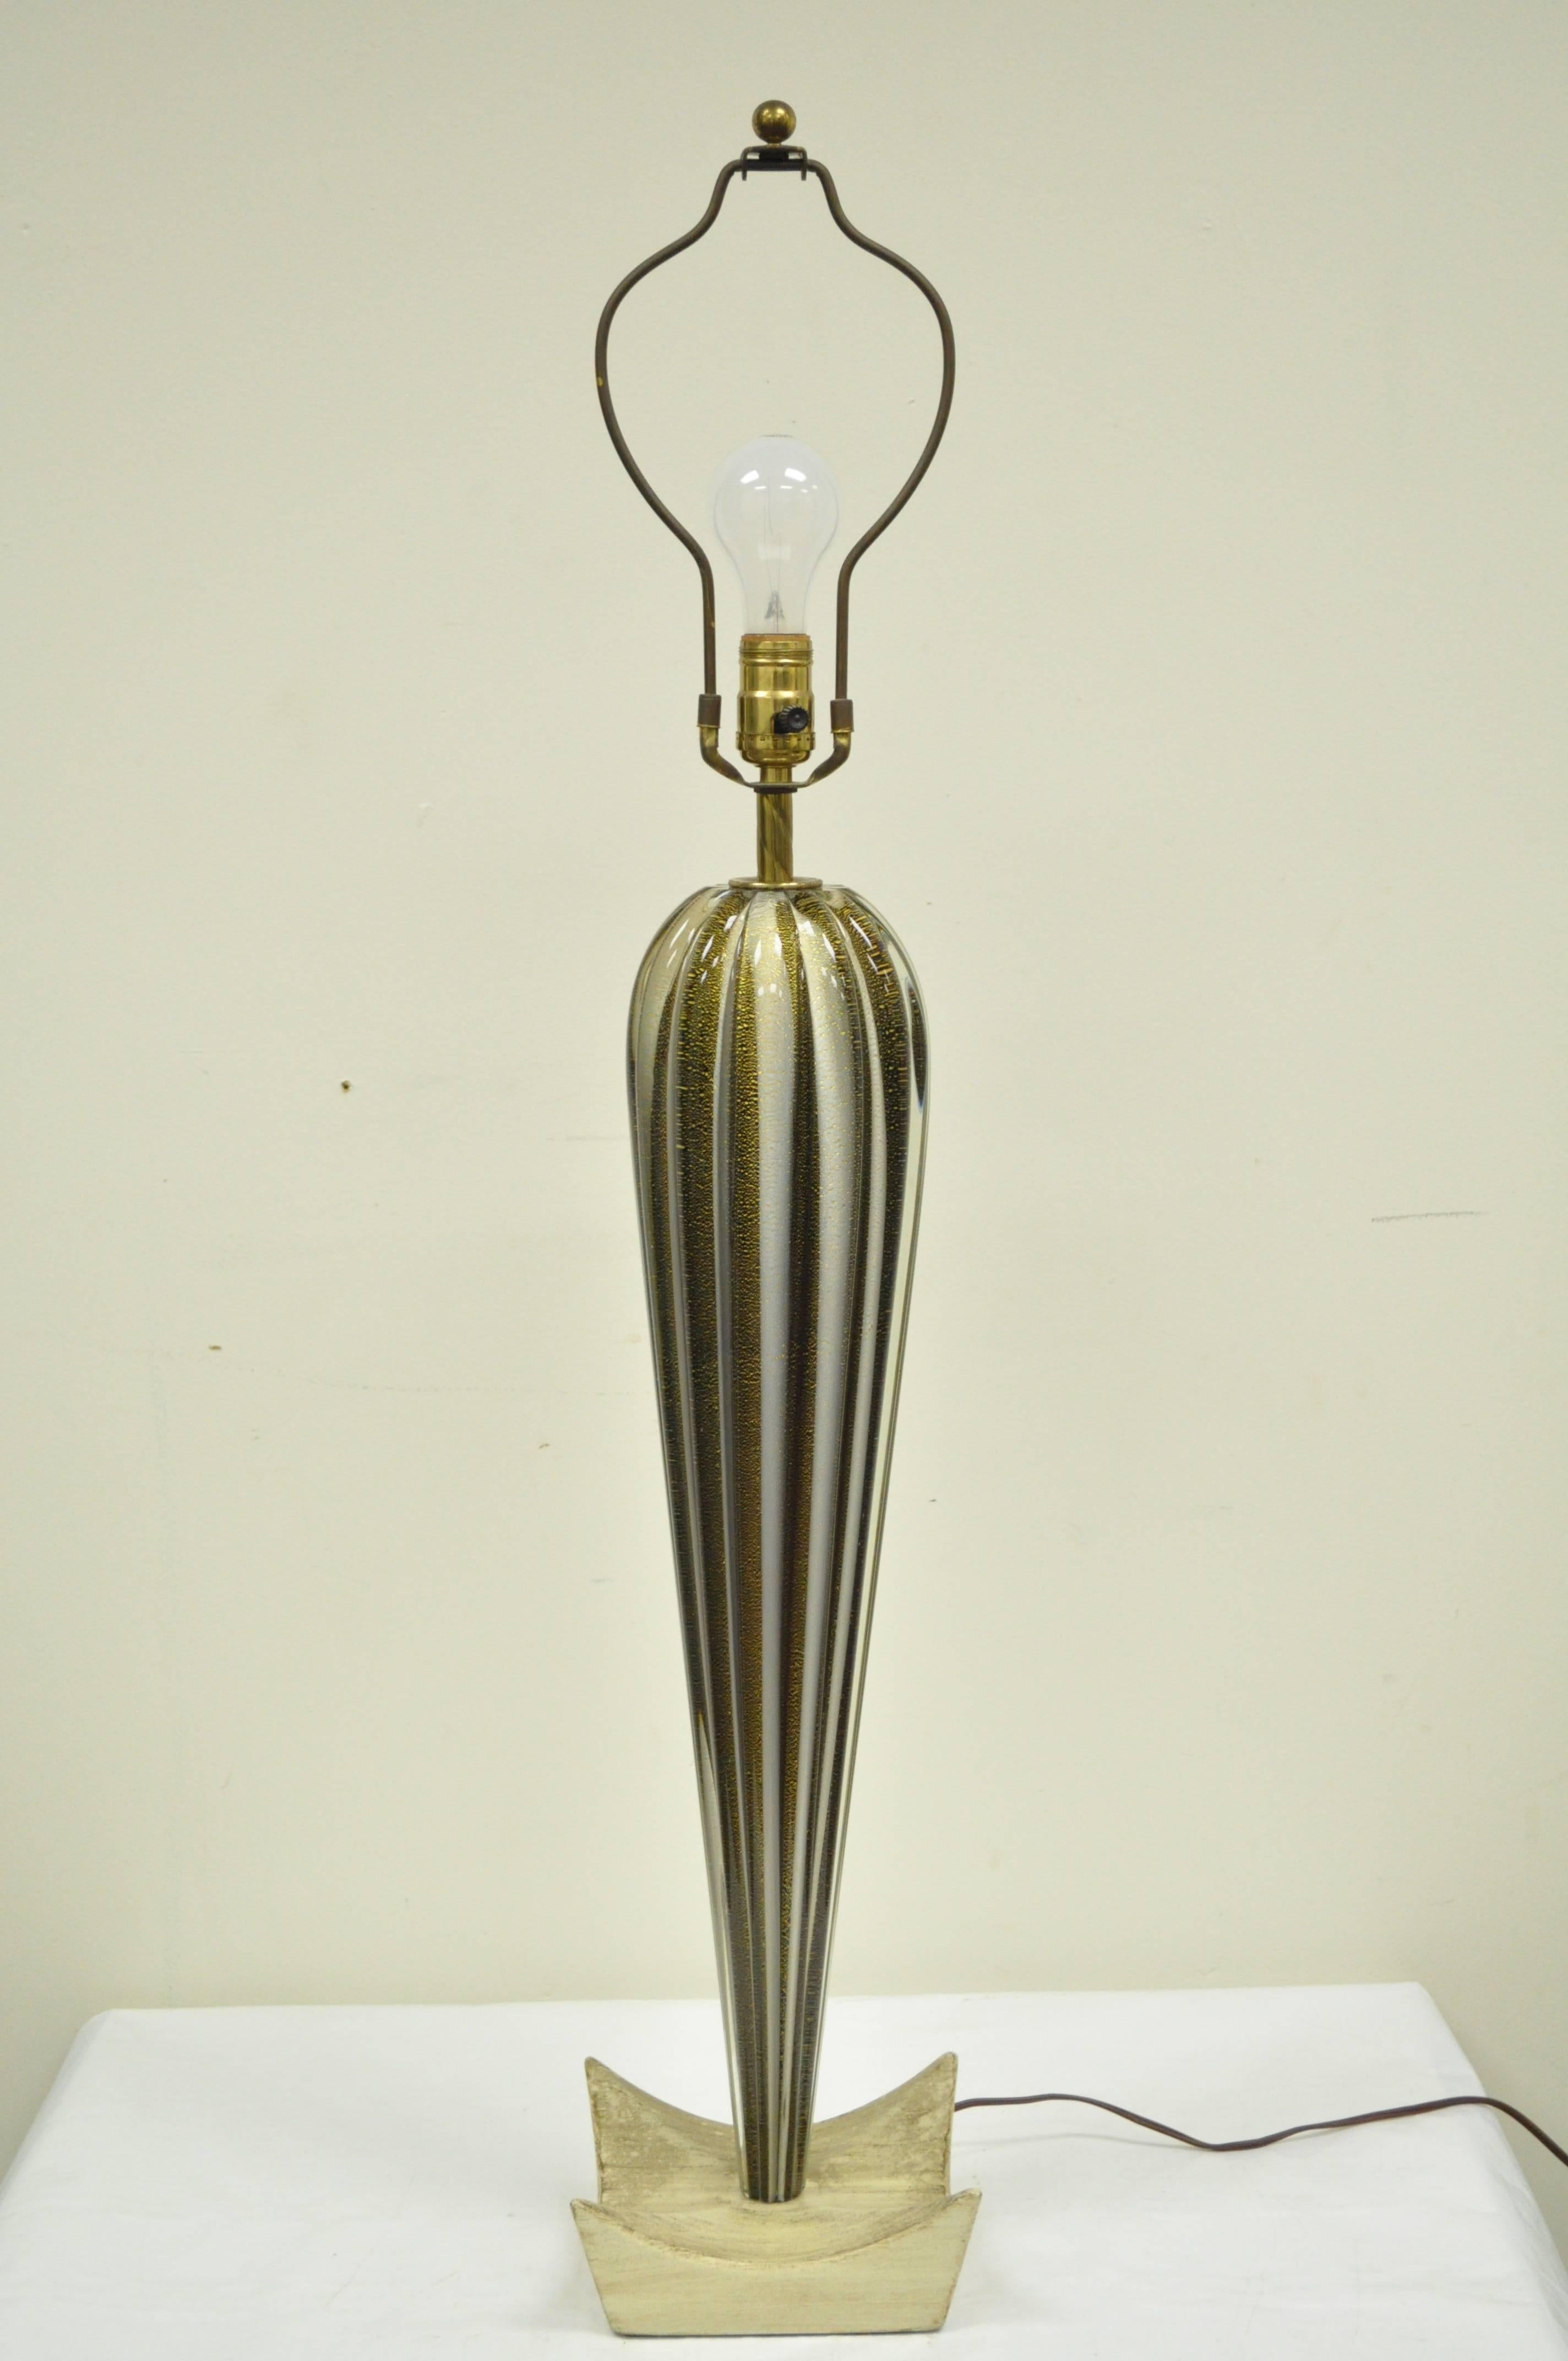 Stunning vintage Murano table lamp attributed to Barovier e Toso. The lamp features a shapely 